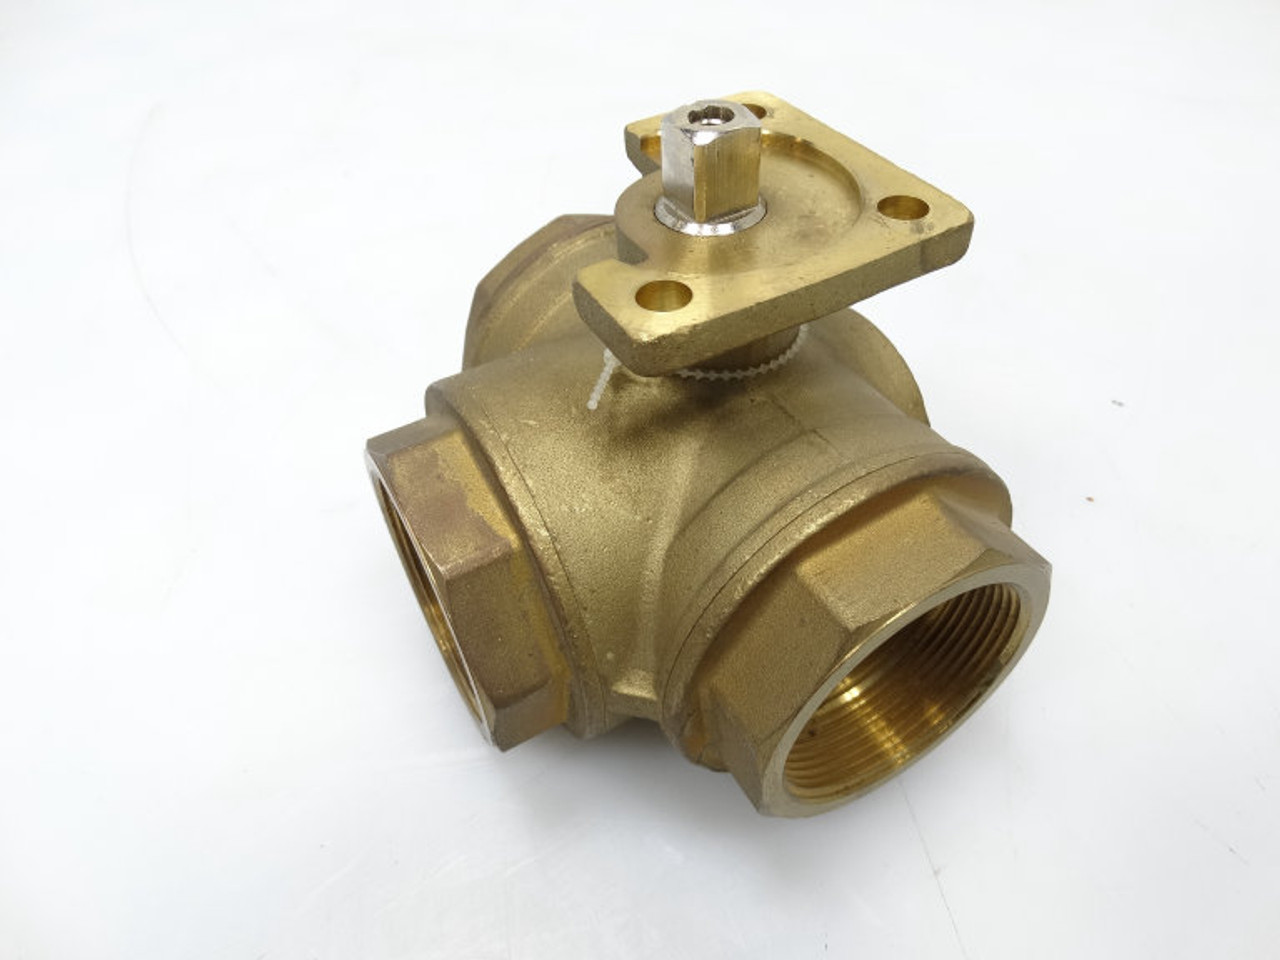 Brass Cw602n/Cw617n Ferrule Valve Authentic Manufacturer ISO9001